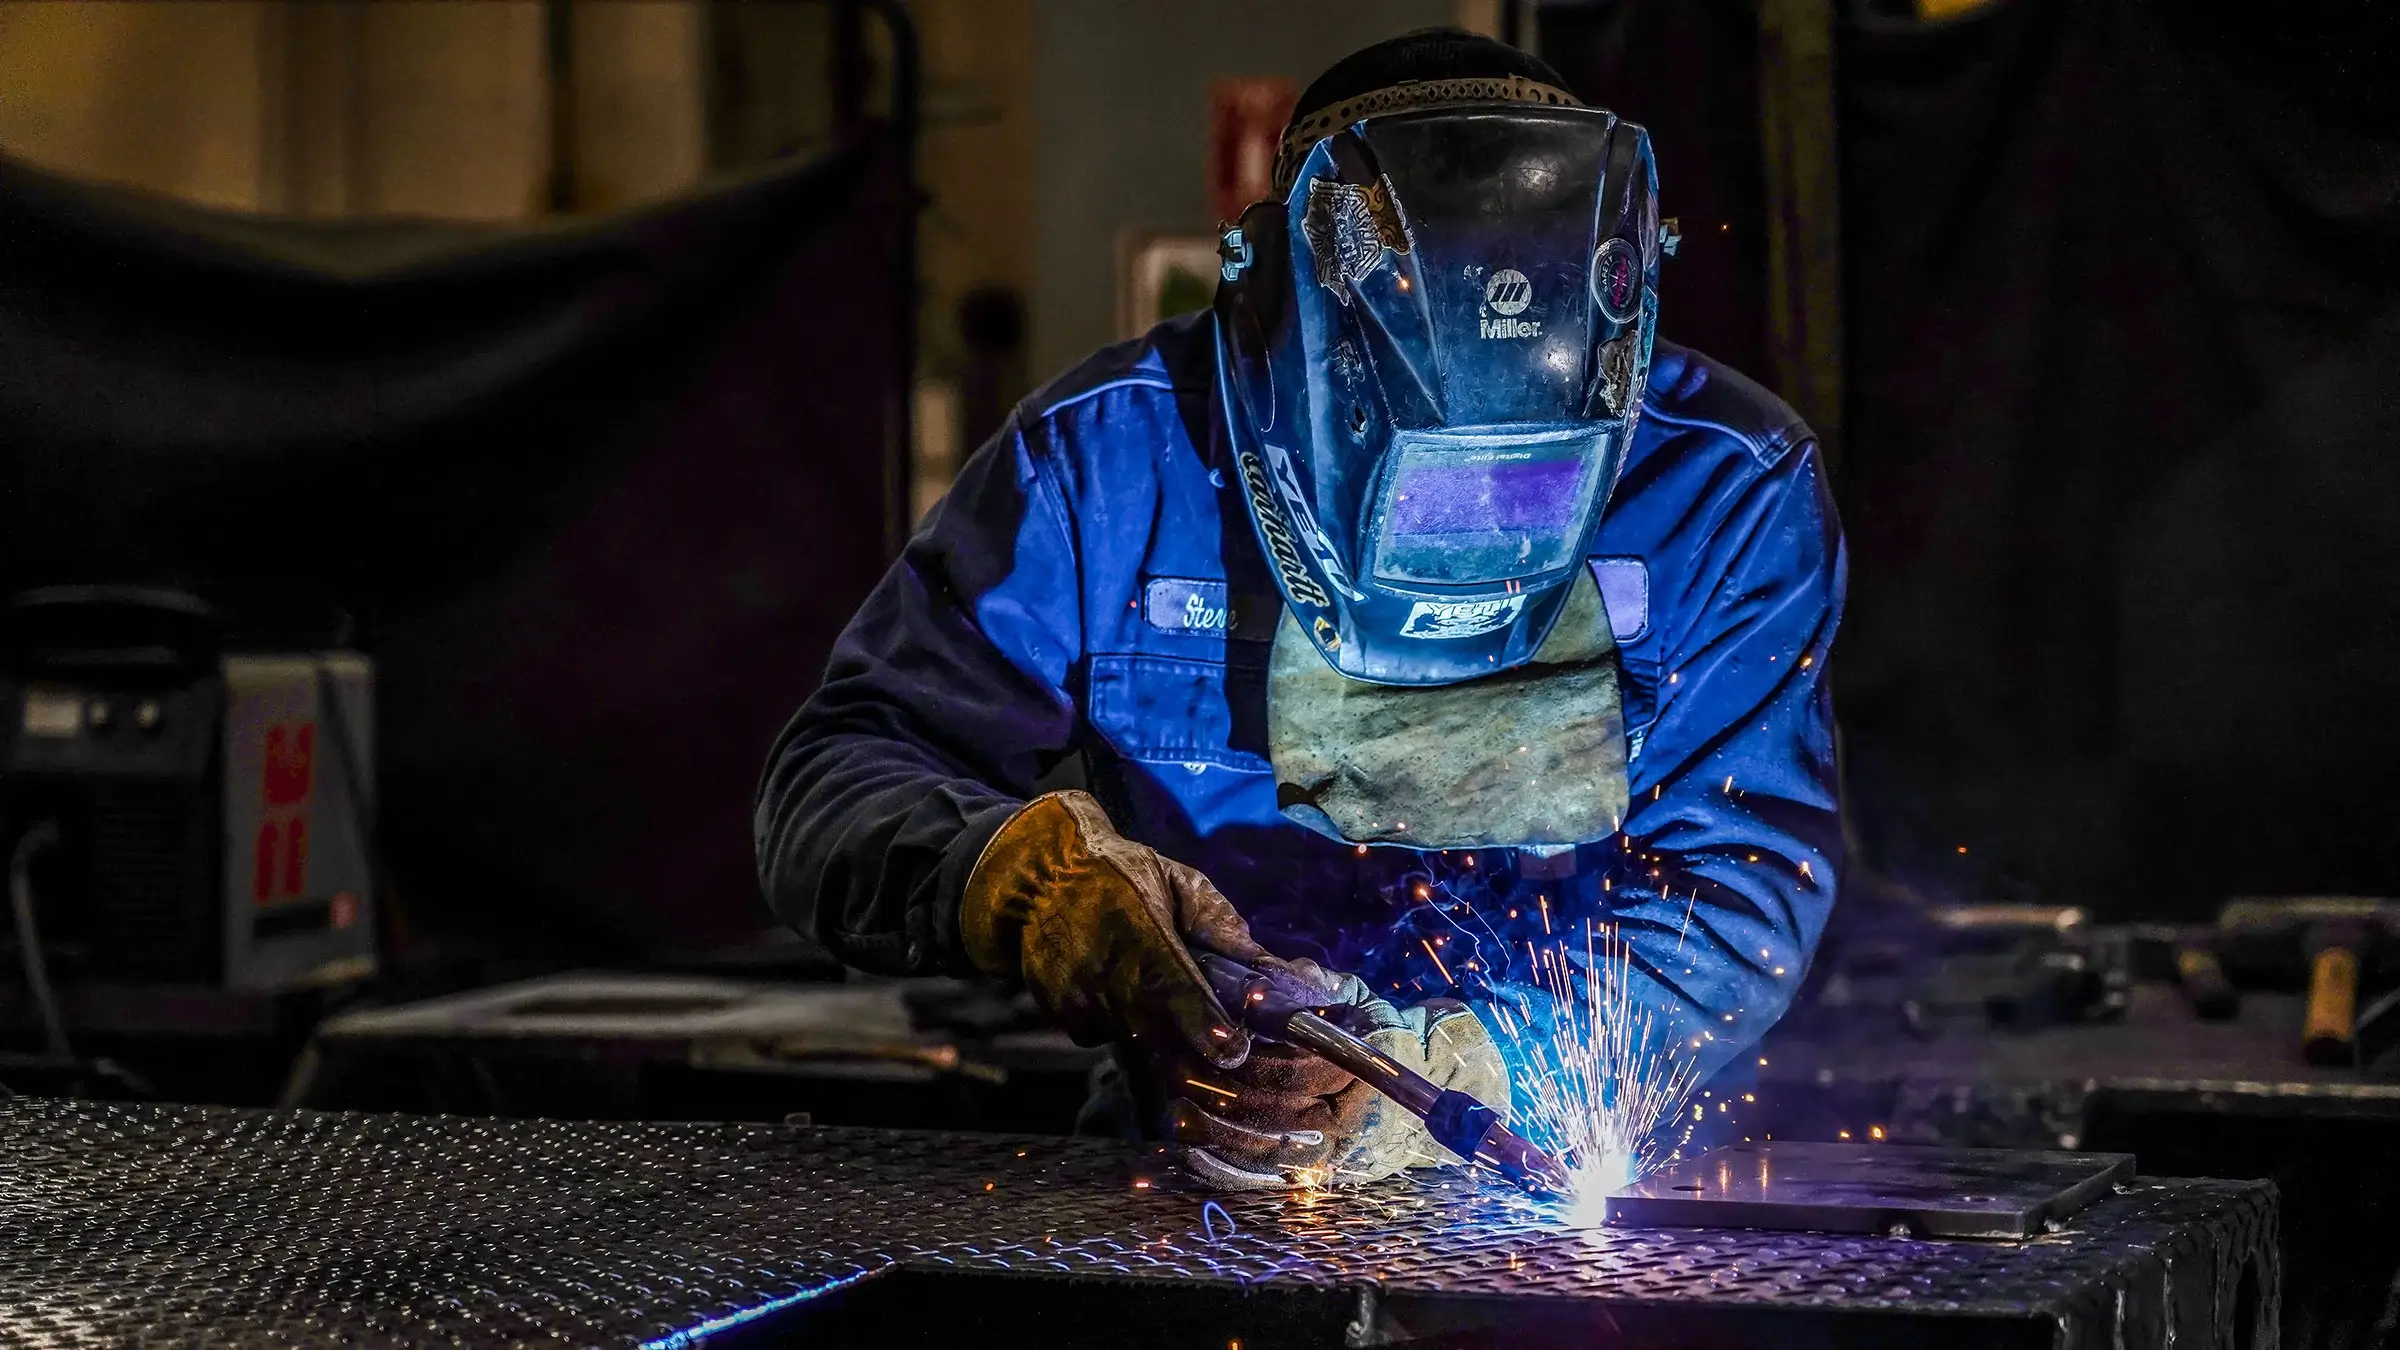 A welder produces sparks as they weld a piece of metal